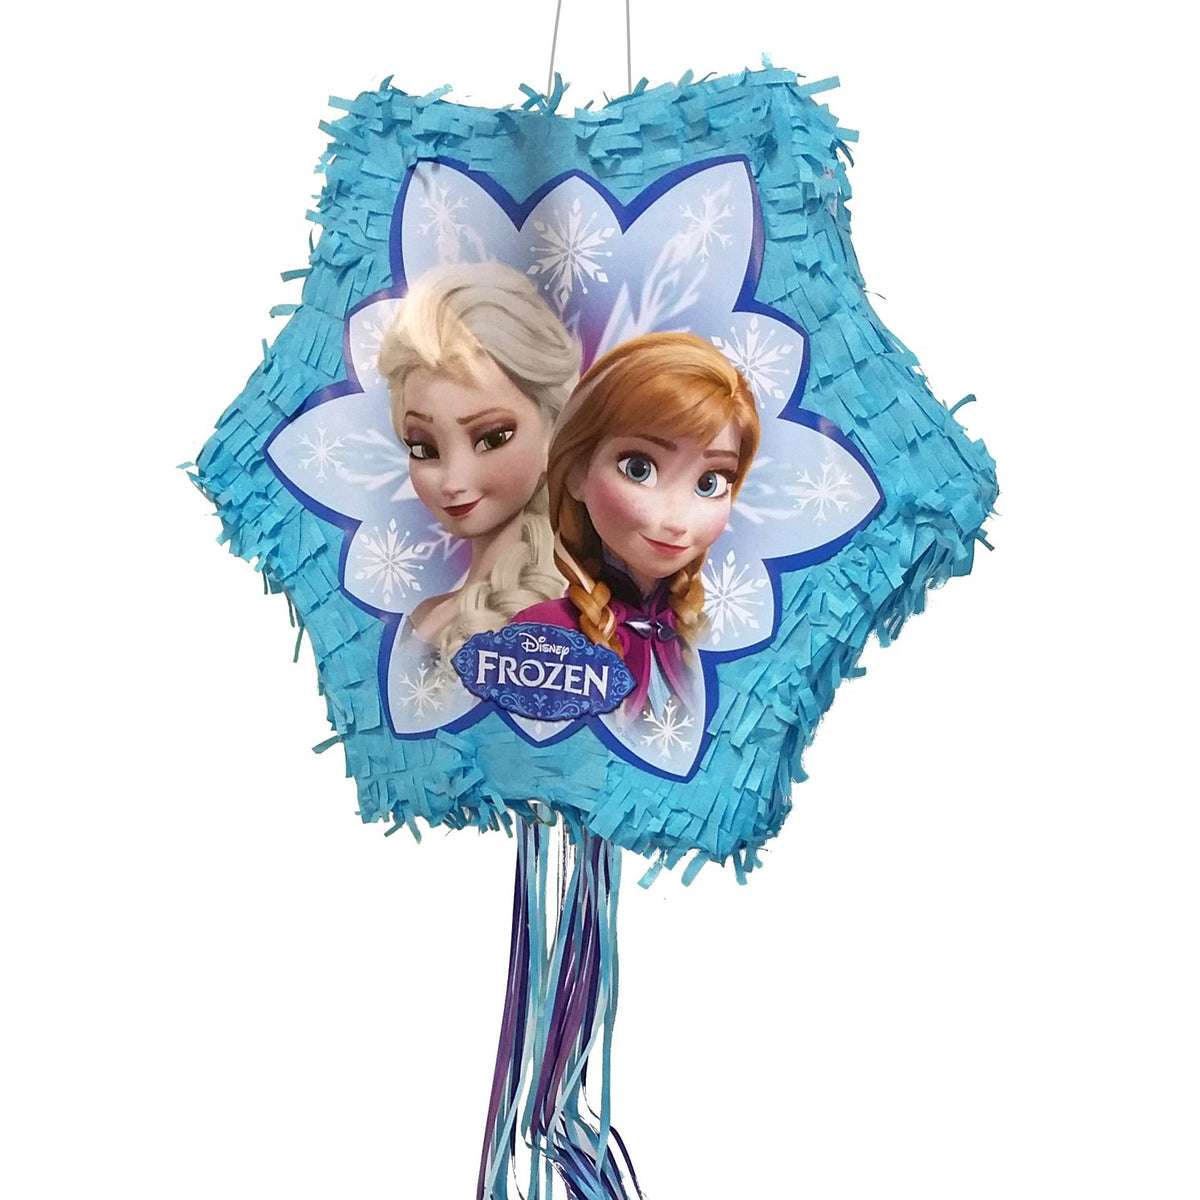 Disney Frozen Elsa & Anna Pinata Hanging Pull String Decoration,  Blue/Silver, 20-in, Holds 2lb of Pinata Filler, for Birthday Parties